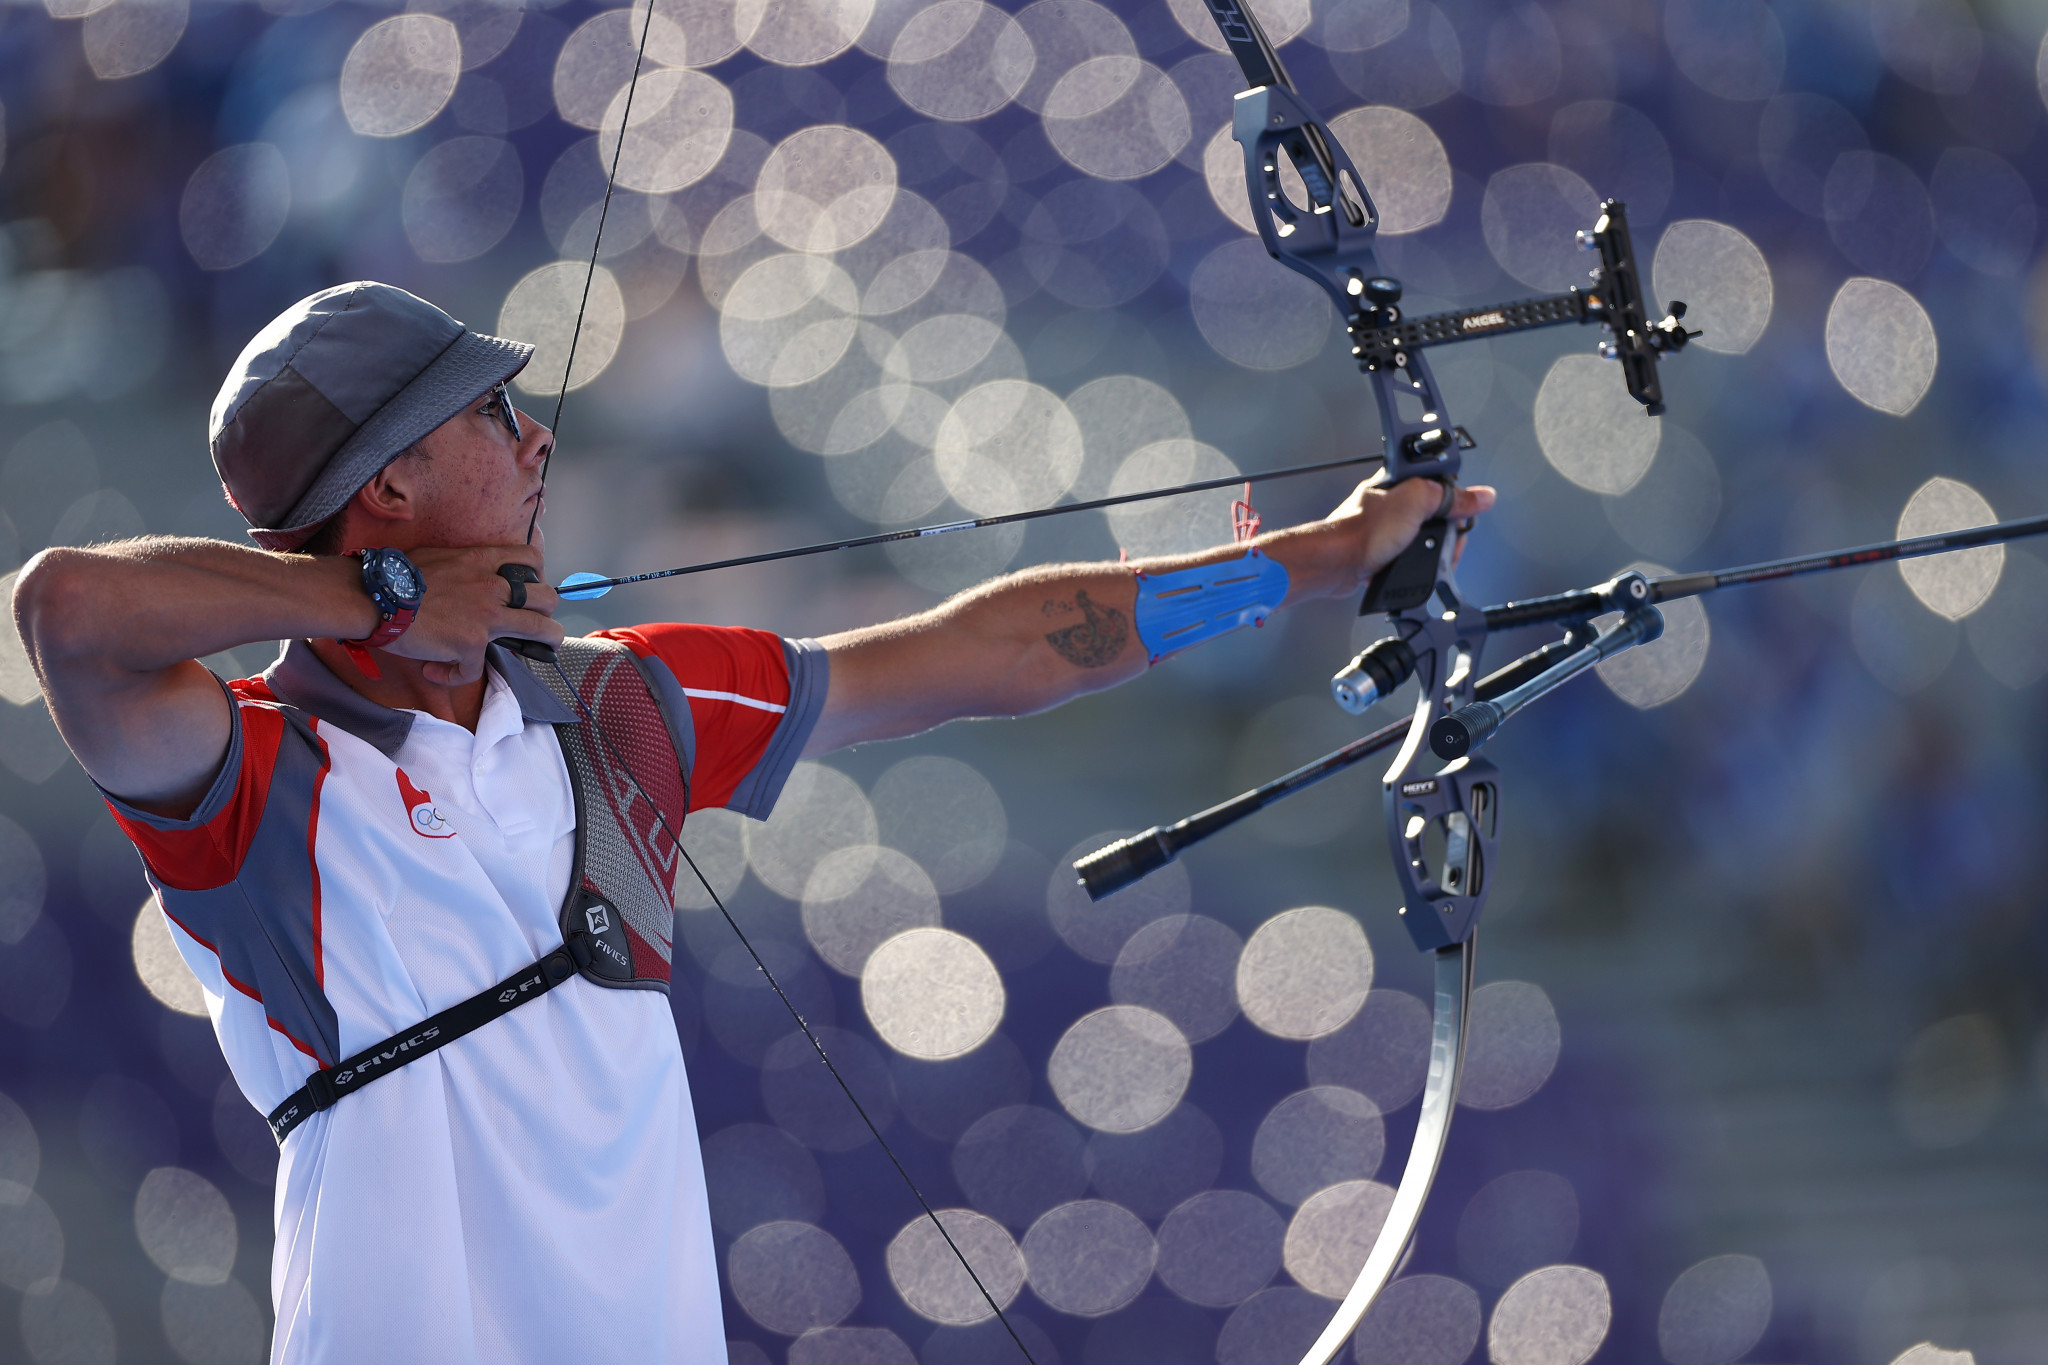 Olympic champion Gazoz among casualties at European Archery Indoor Championships